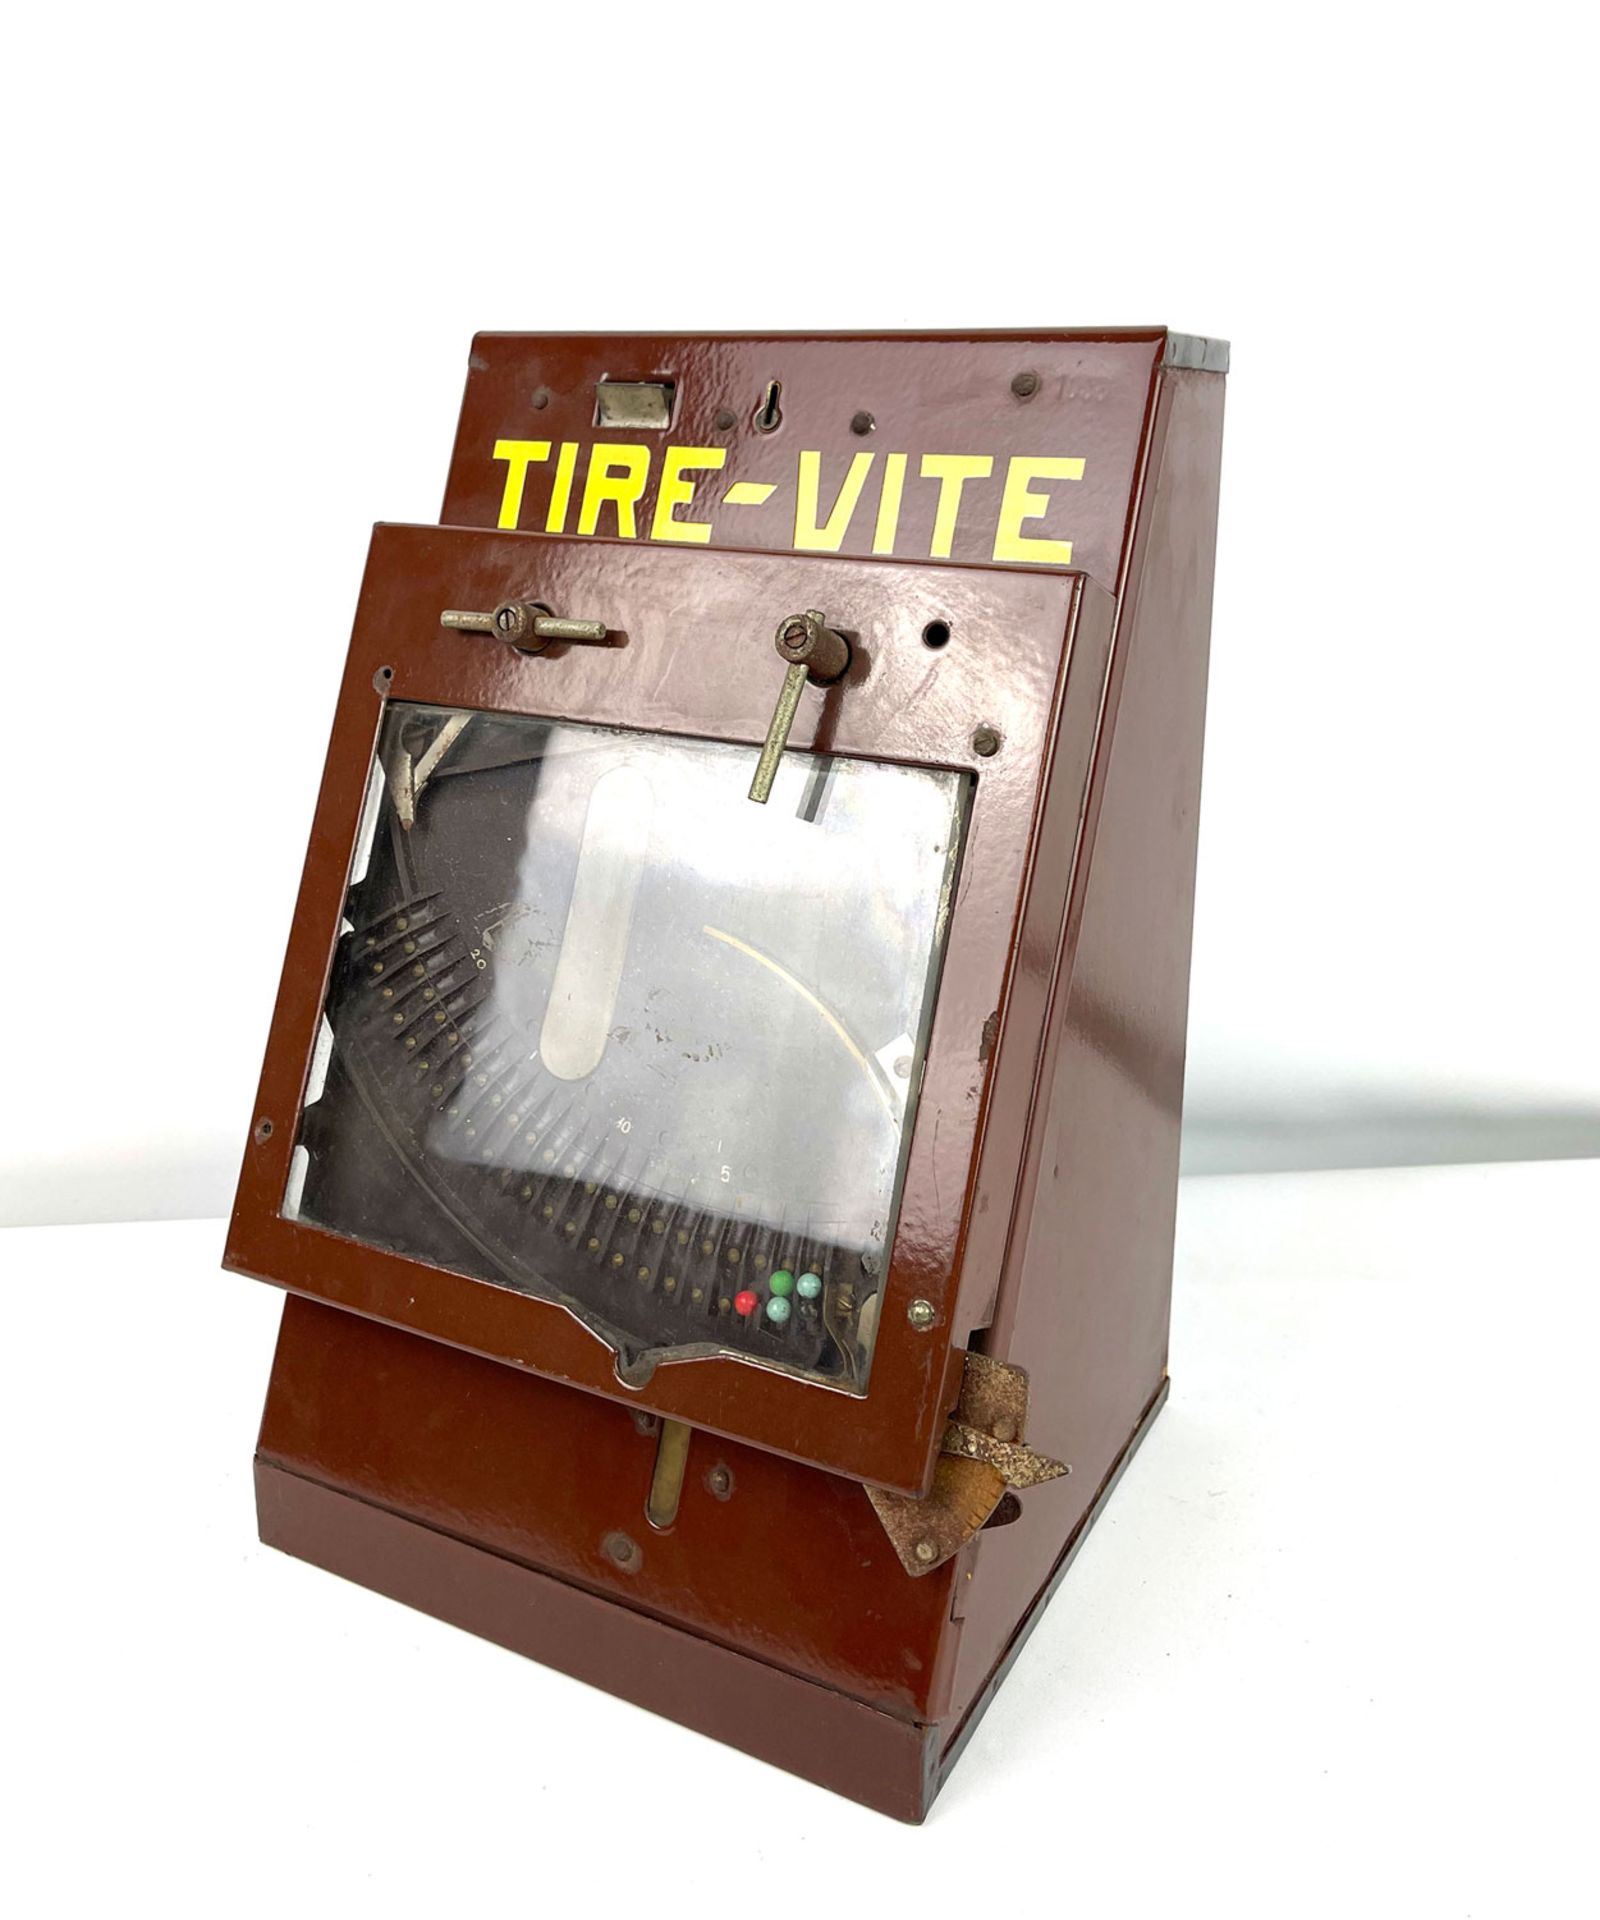 Tire-Vite French Coin-Op Arcade Game ca. 1935